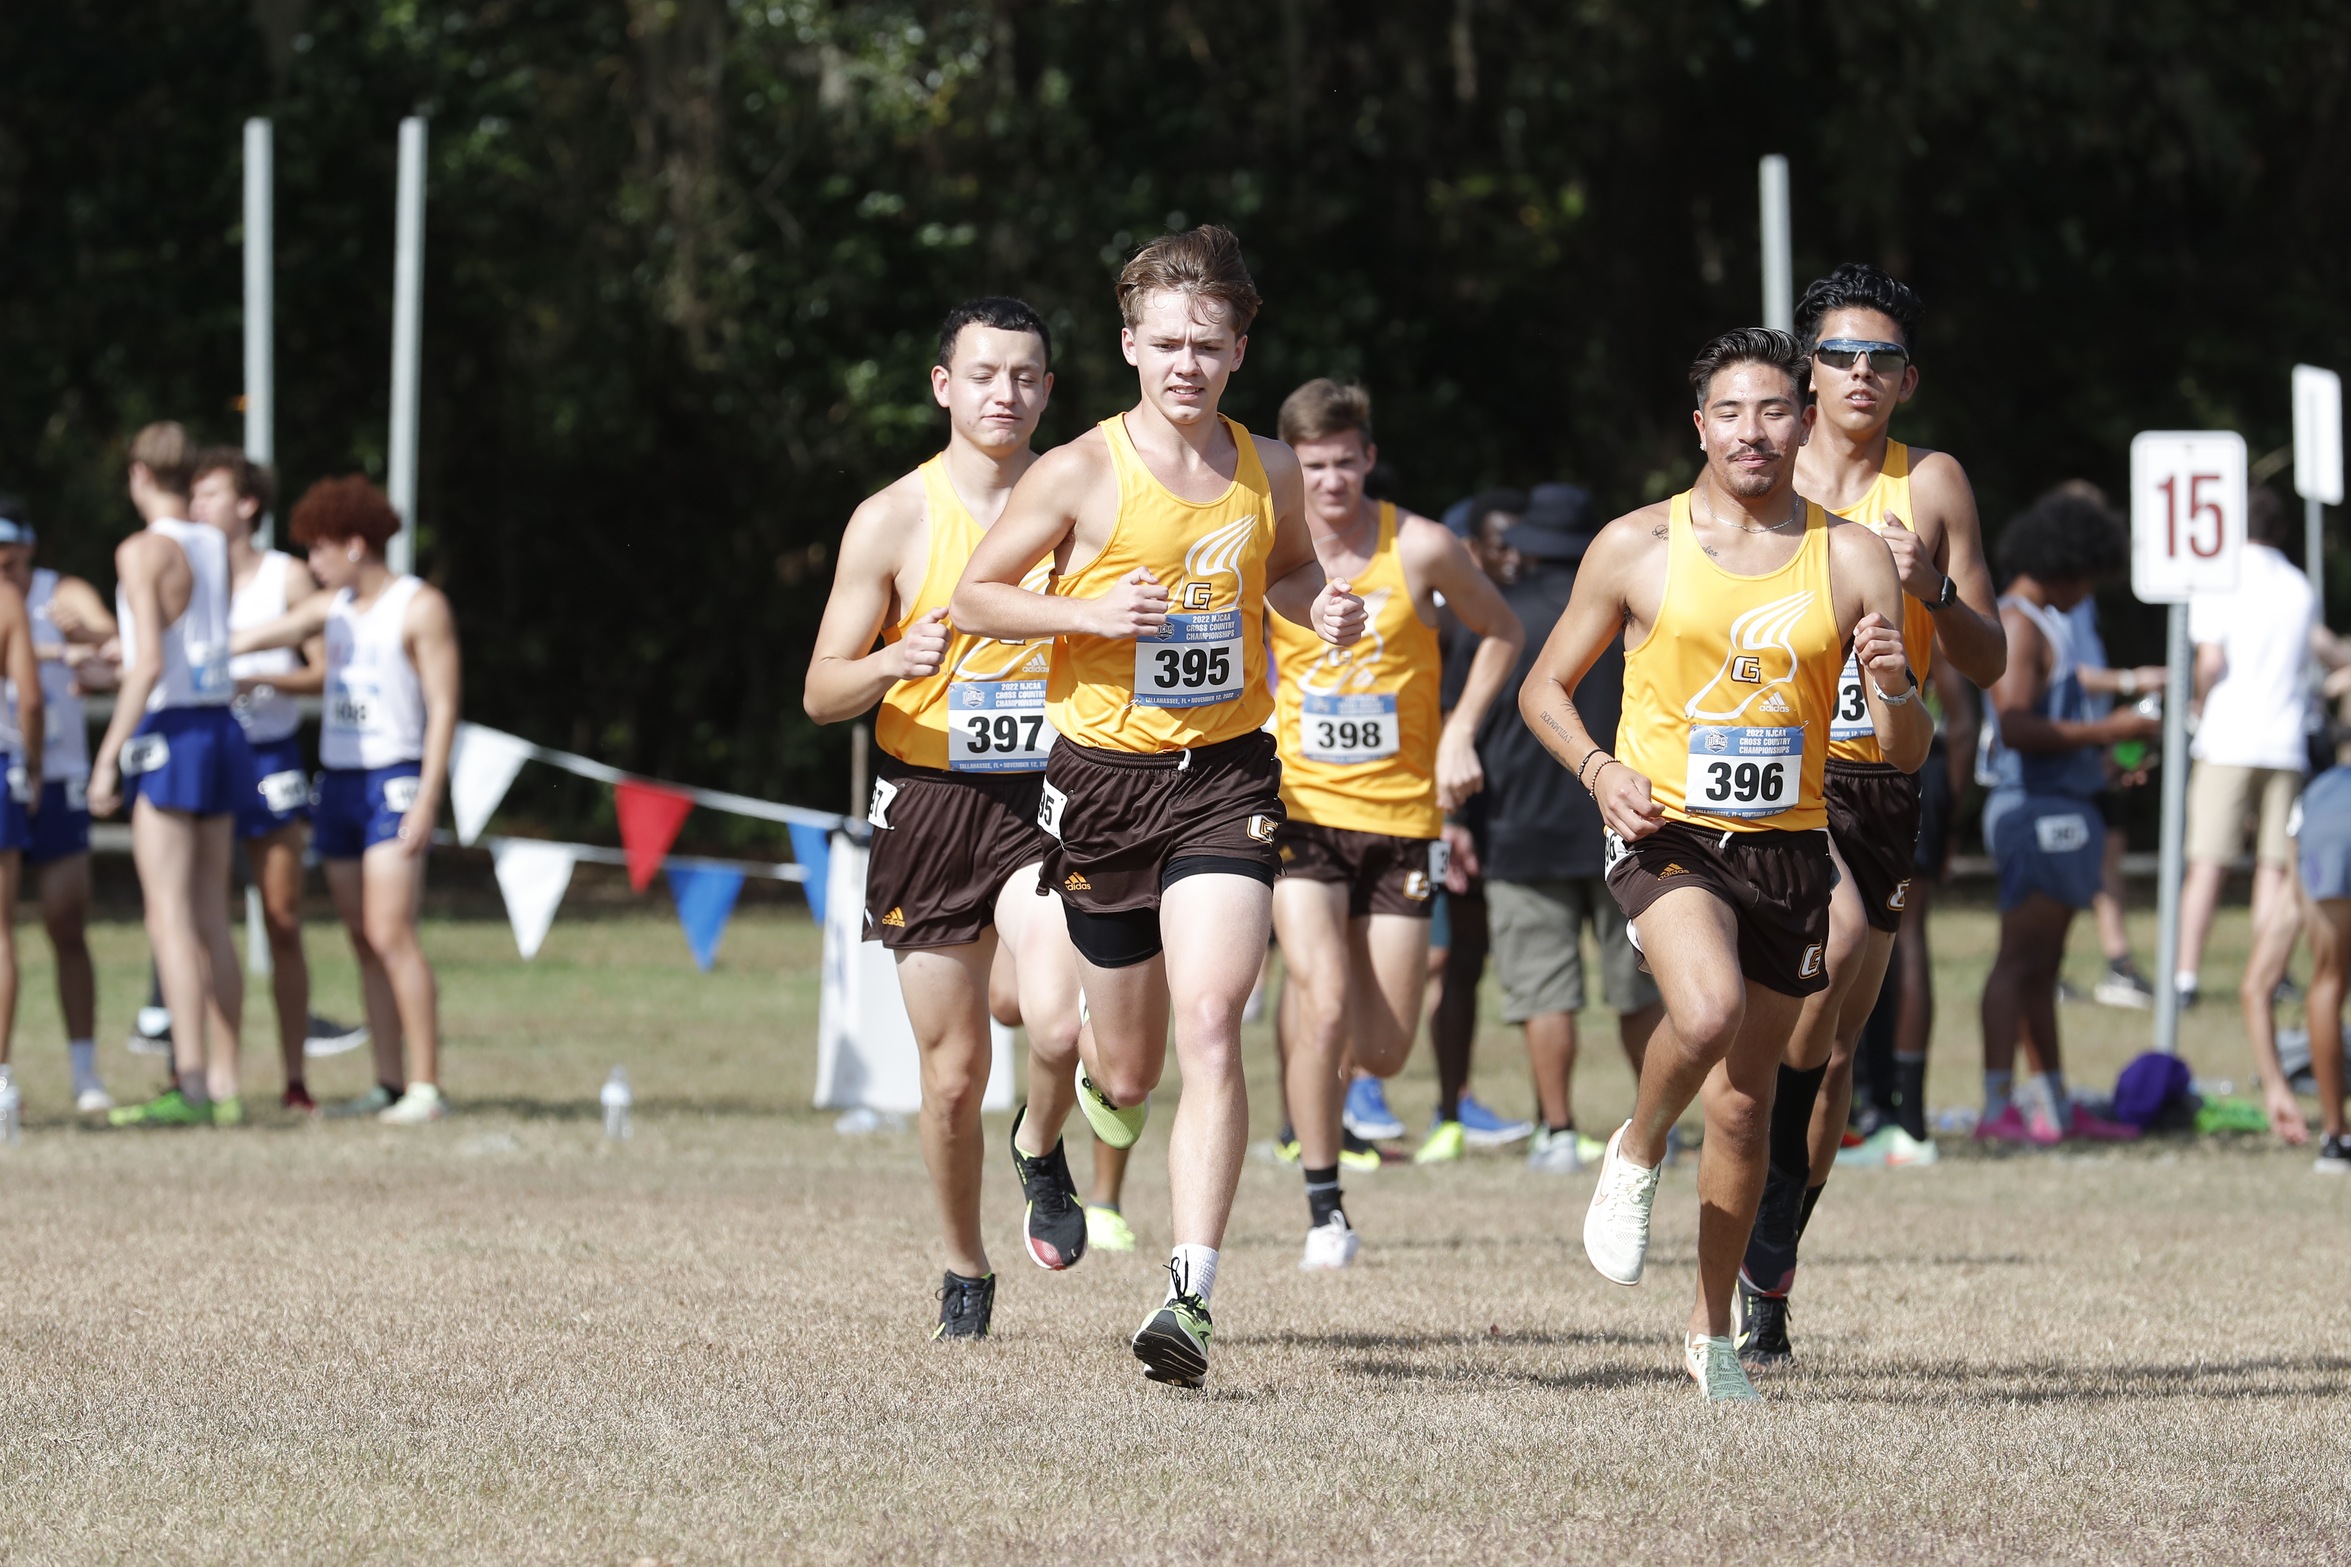 Stellar performance by Broncbusters at National Championships